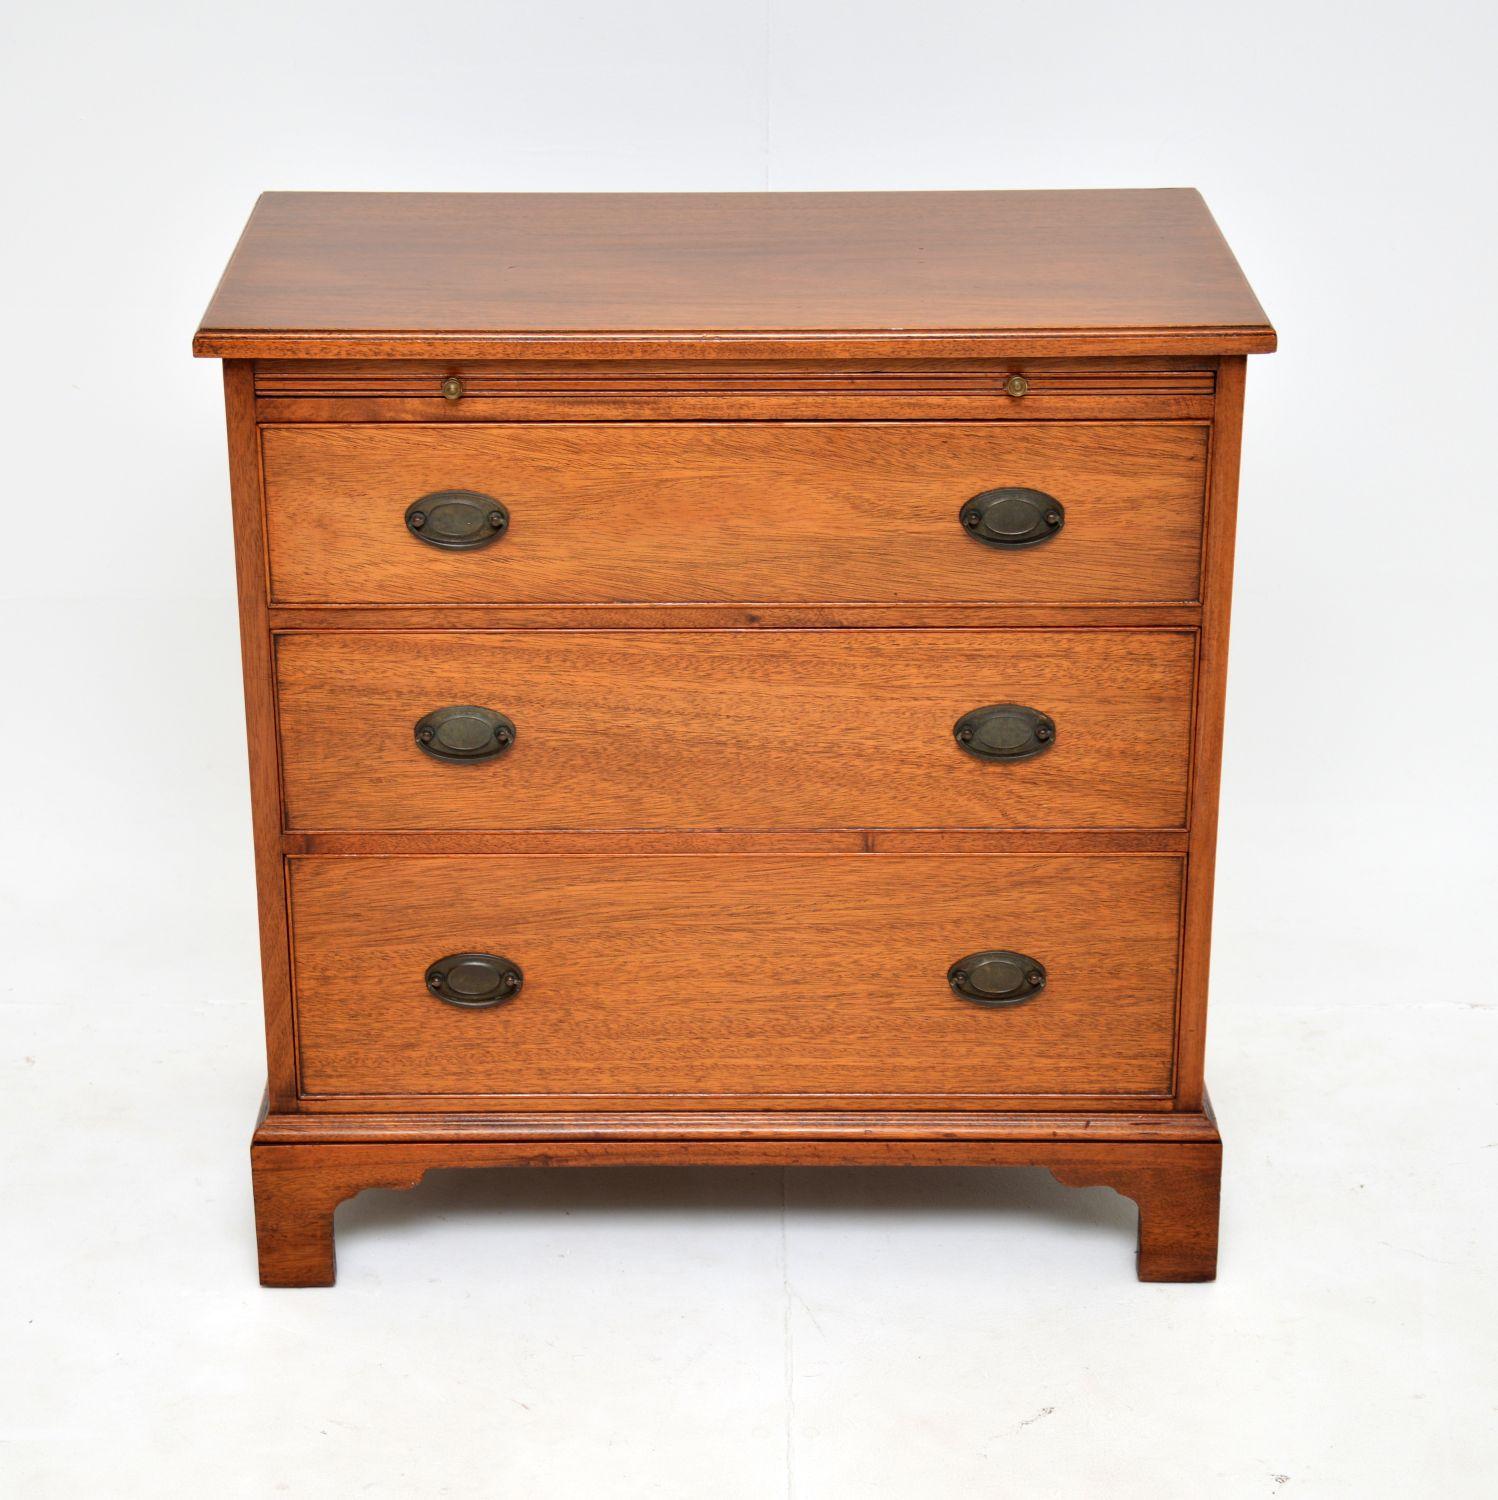 A very smart and useful antique chest of drawers. This was made in England, it dates from around the 1900-1910 period.

The quality is superb, this is very well made and is a practical size. It is low and compact, yet offers plenty of storage in